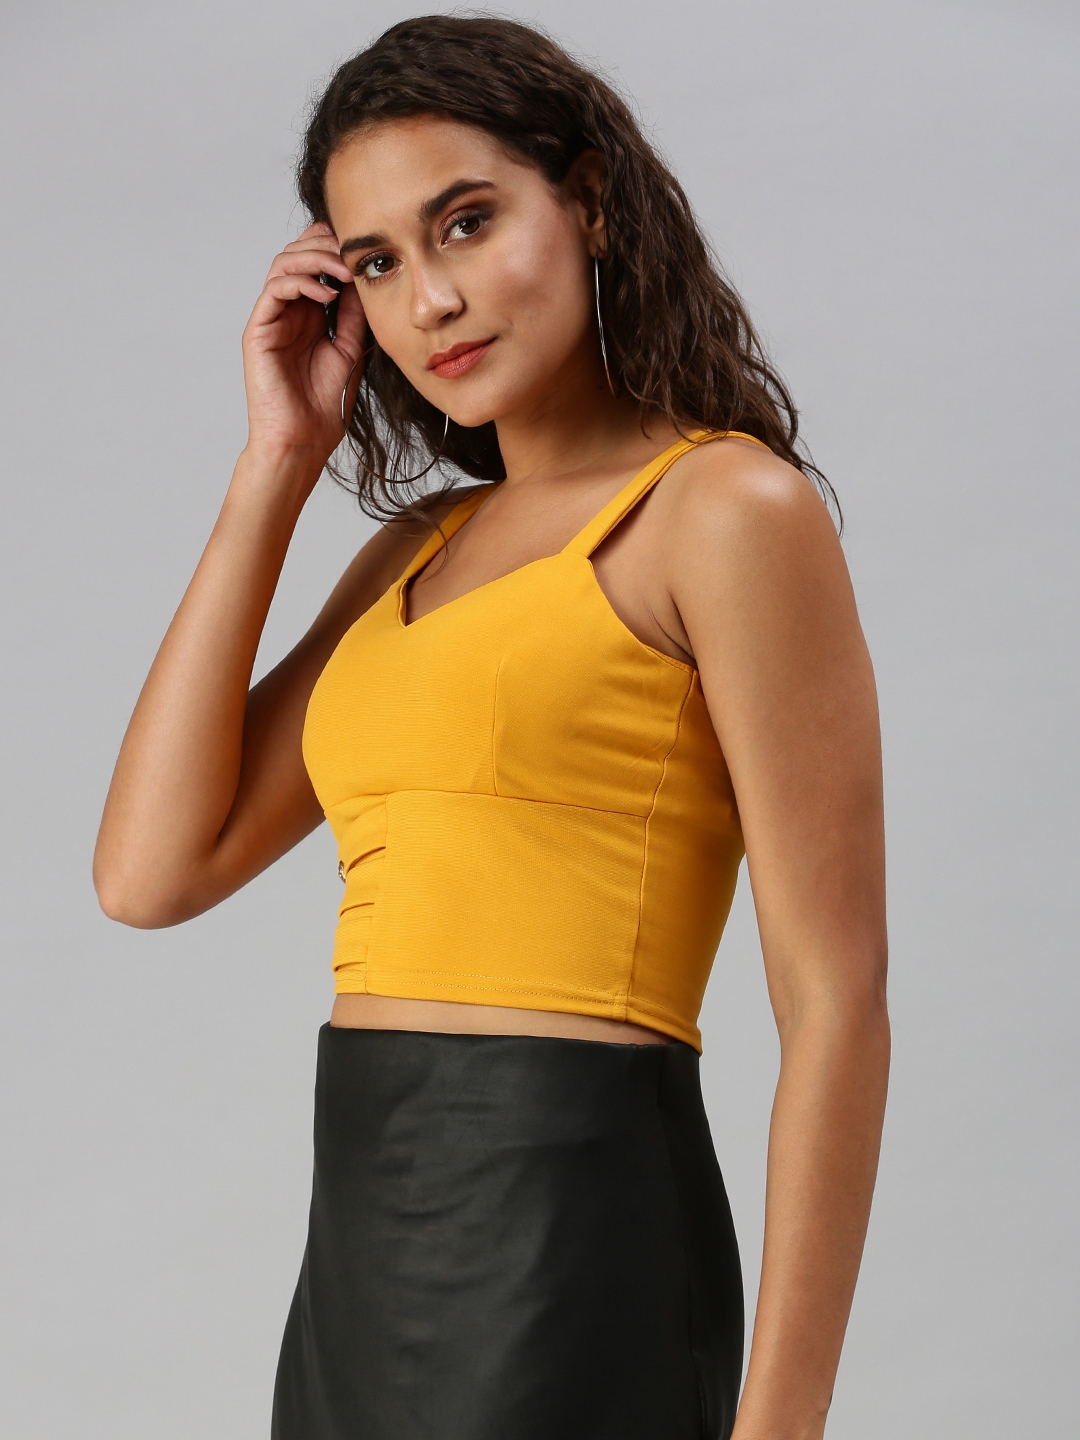 Women's Yellow Polycotton Solid Tops